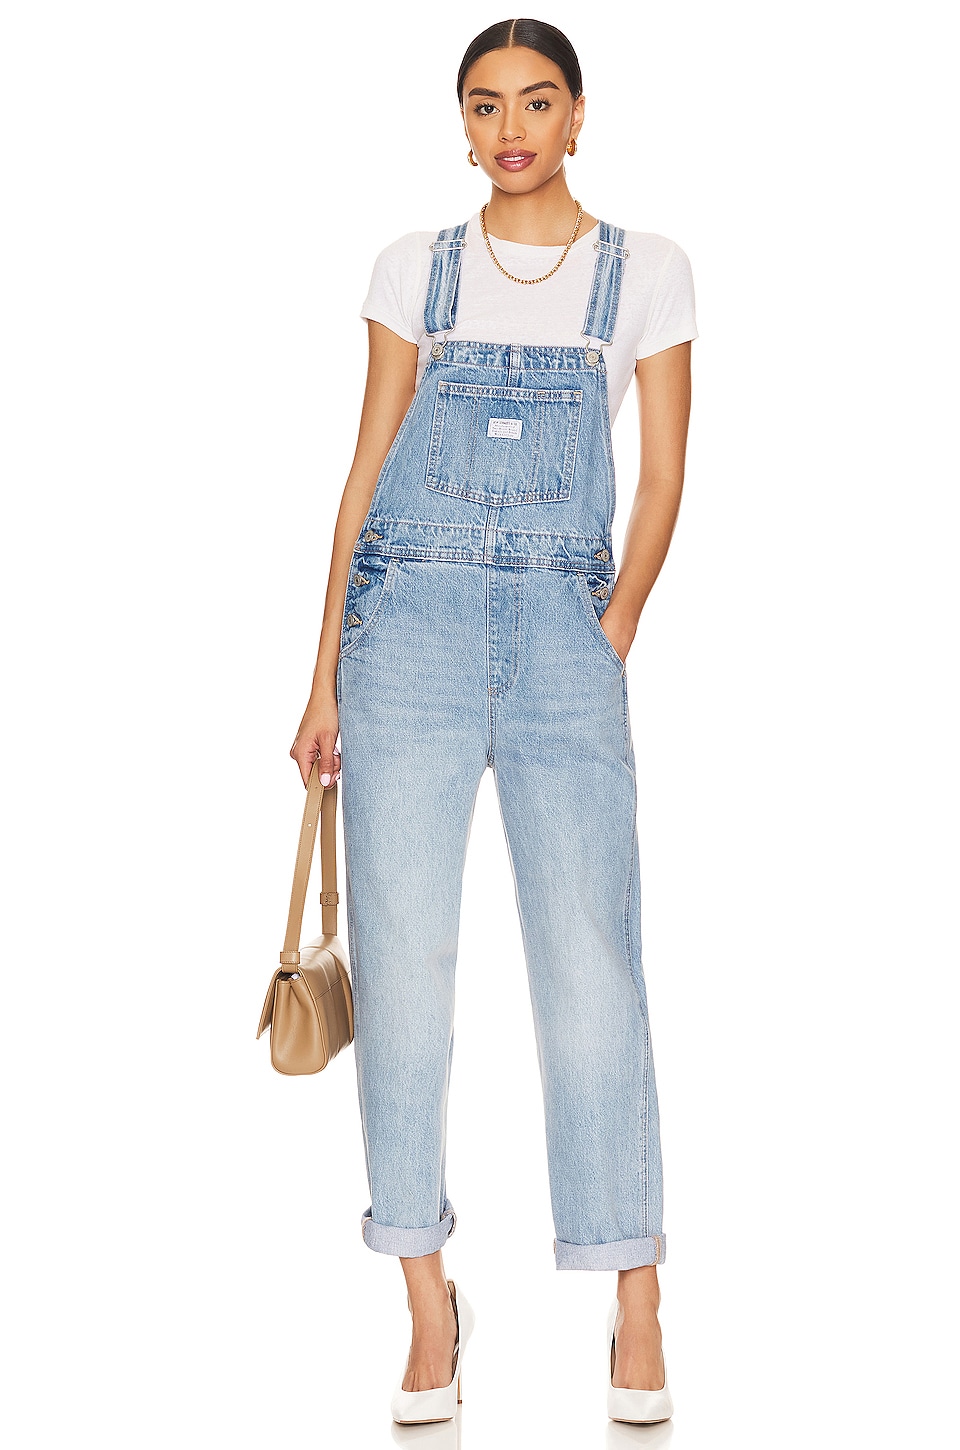 LEVI'S Vintage Overall in What A Delight | REVOLVE